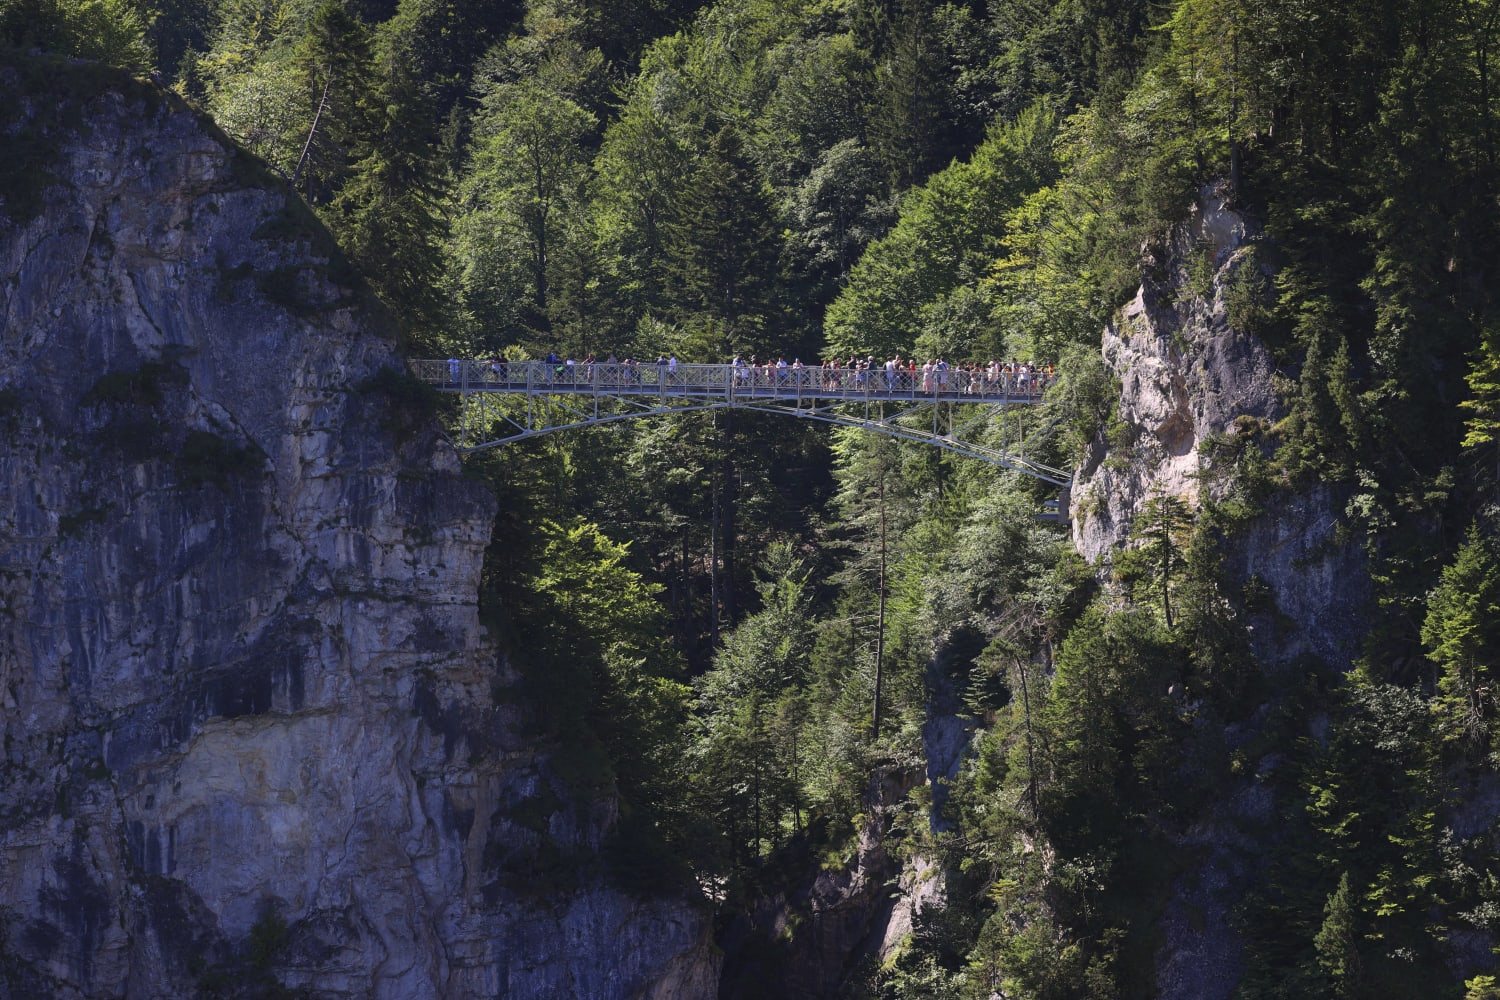 American woman who was pushed into a ravine near Neuschwanstein castle is out of the hospital